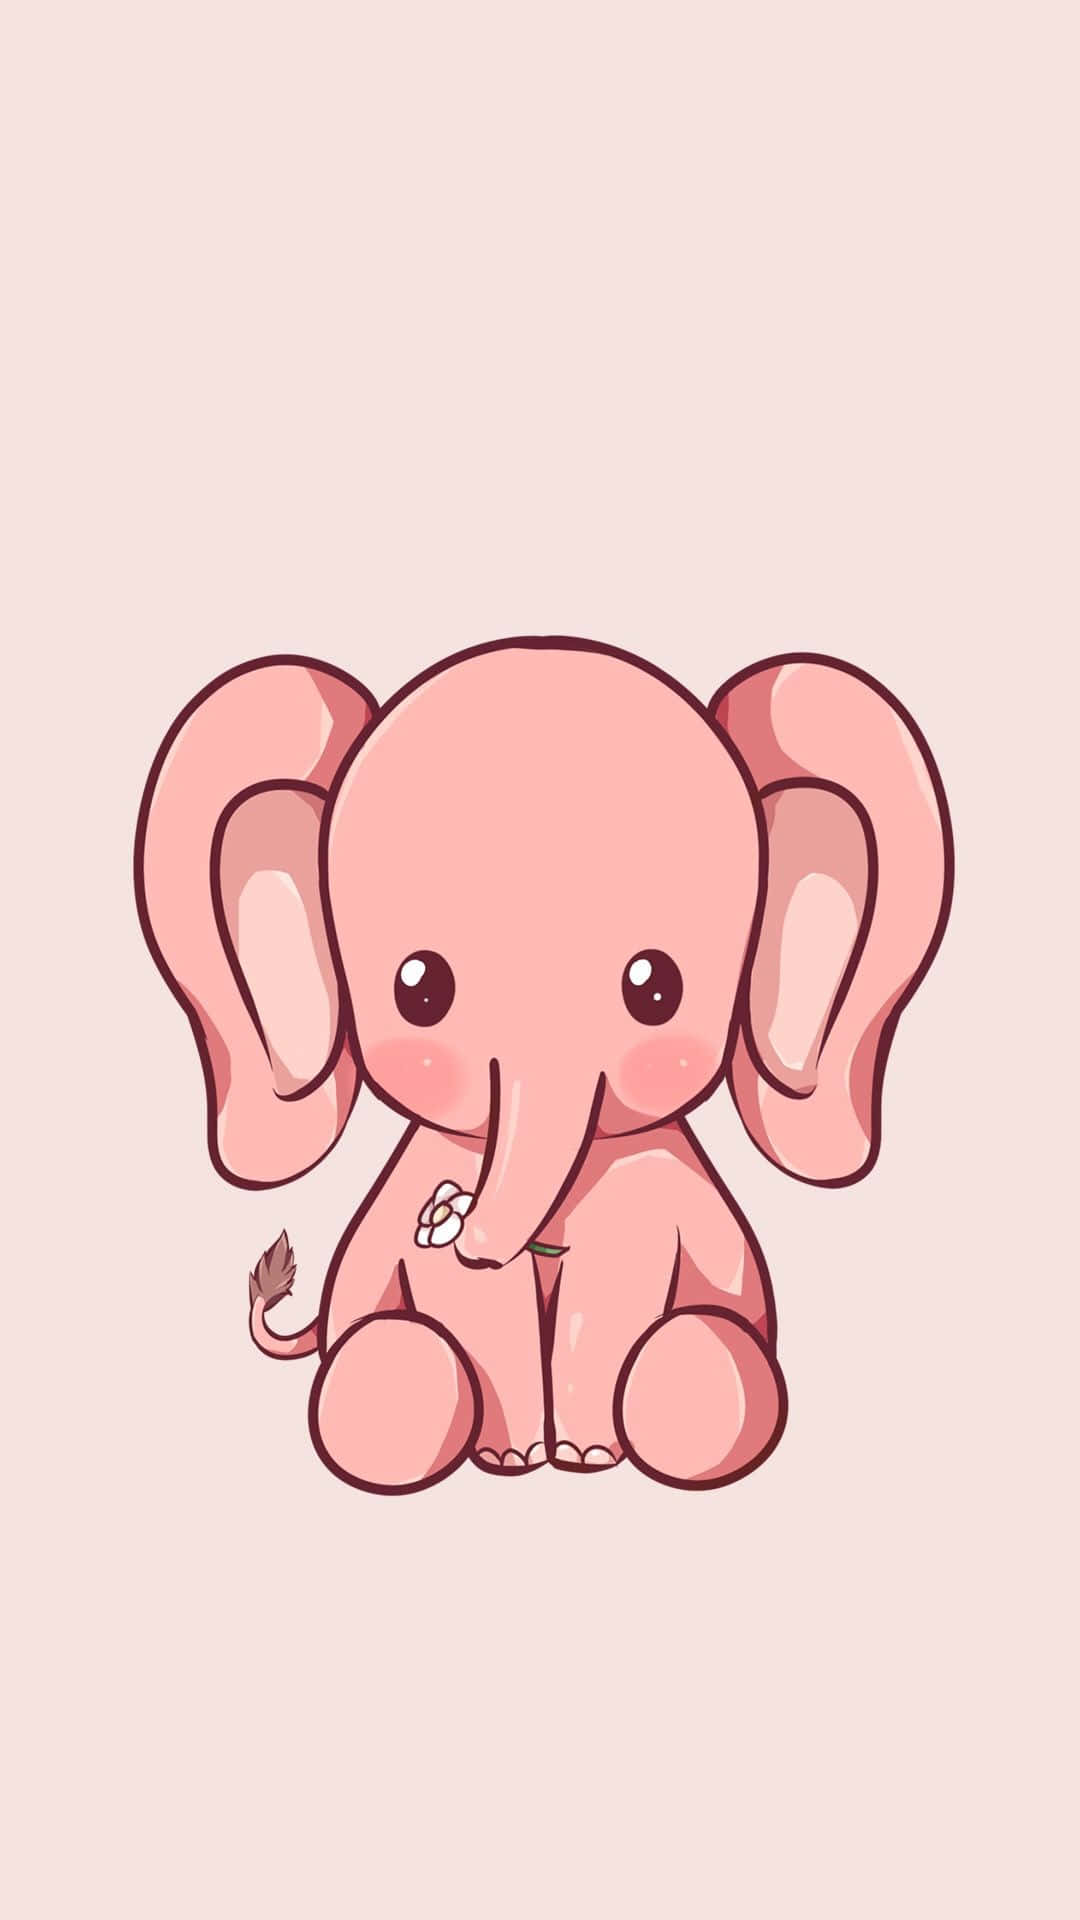 Download Adorable Kawaii Elephant With Lively Background Wallpaper ...